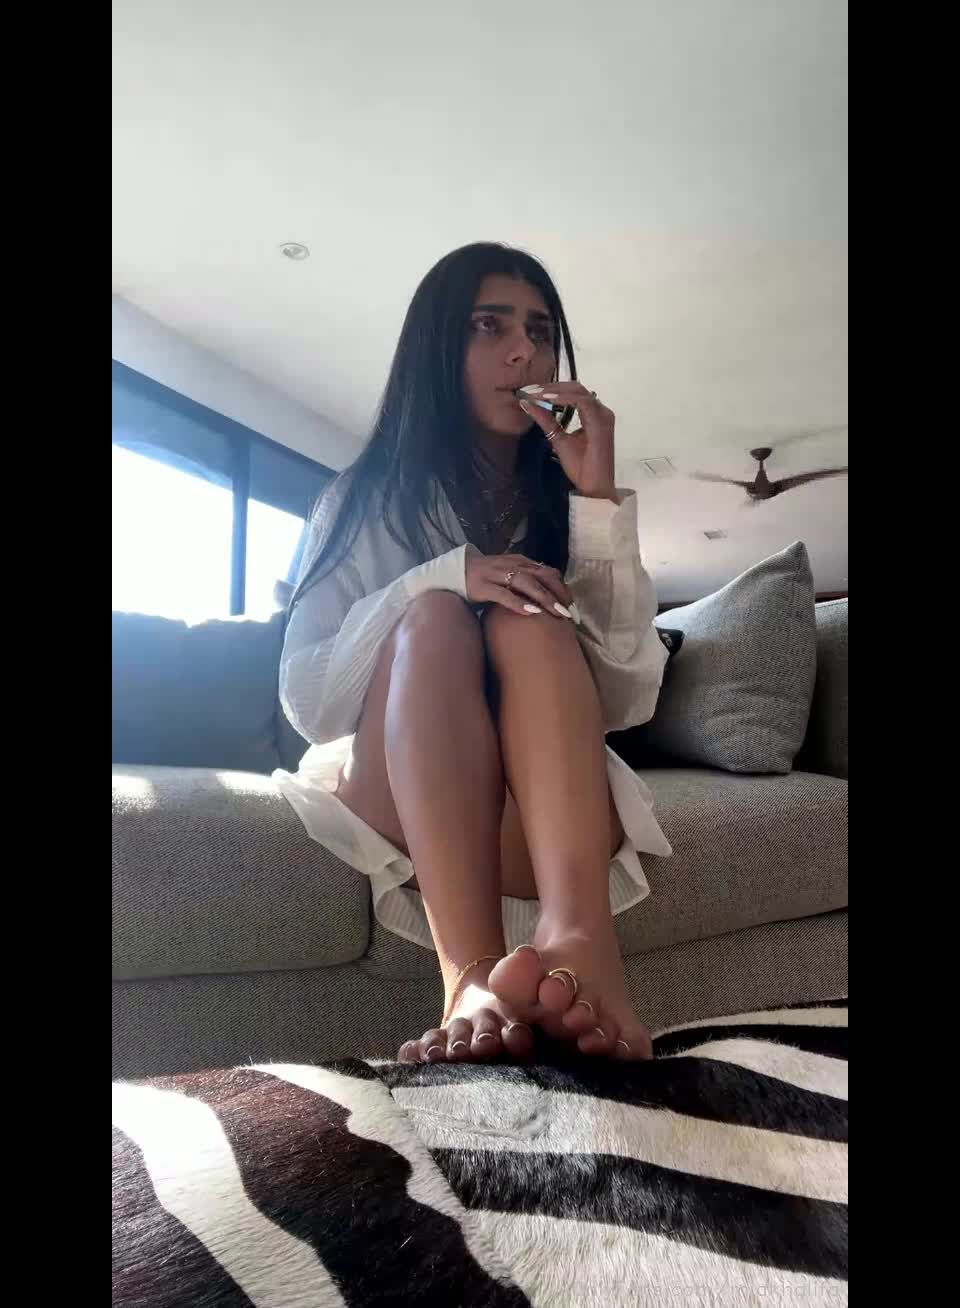 Onlyfans - Miakhalifa - Stream started at      pm FIELD TRIP DAY - 28-06-2021